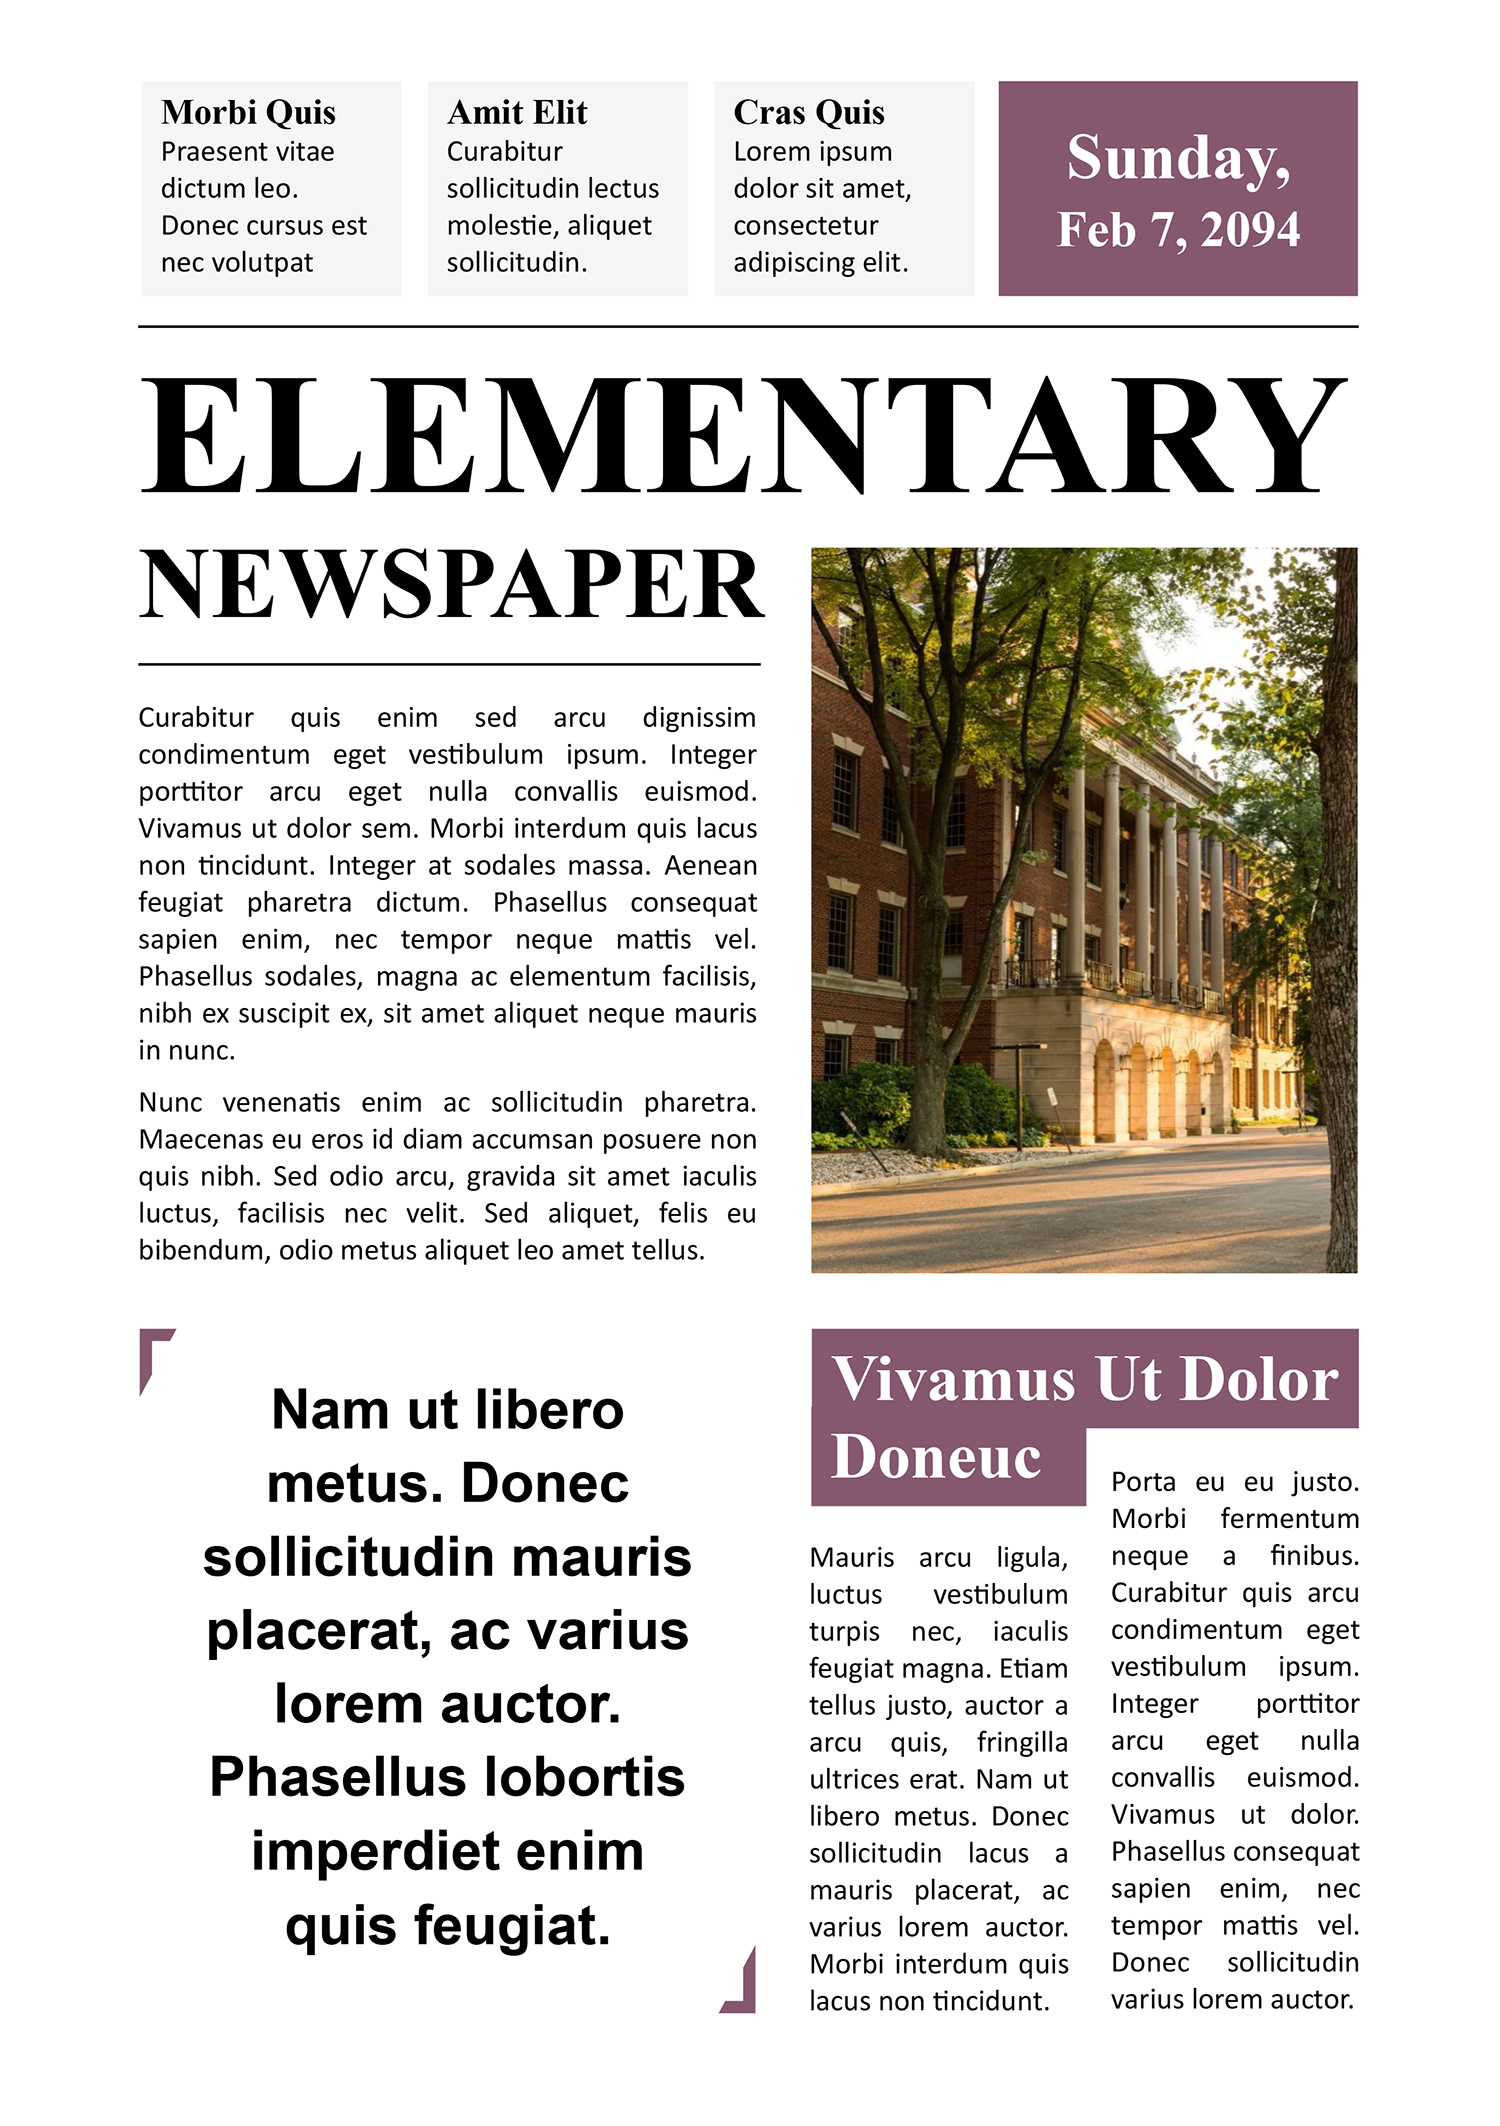 Newspaper Article Template for Elementary Students - Page 01